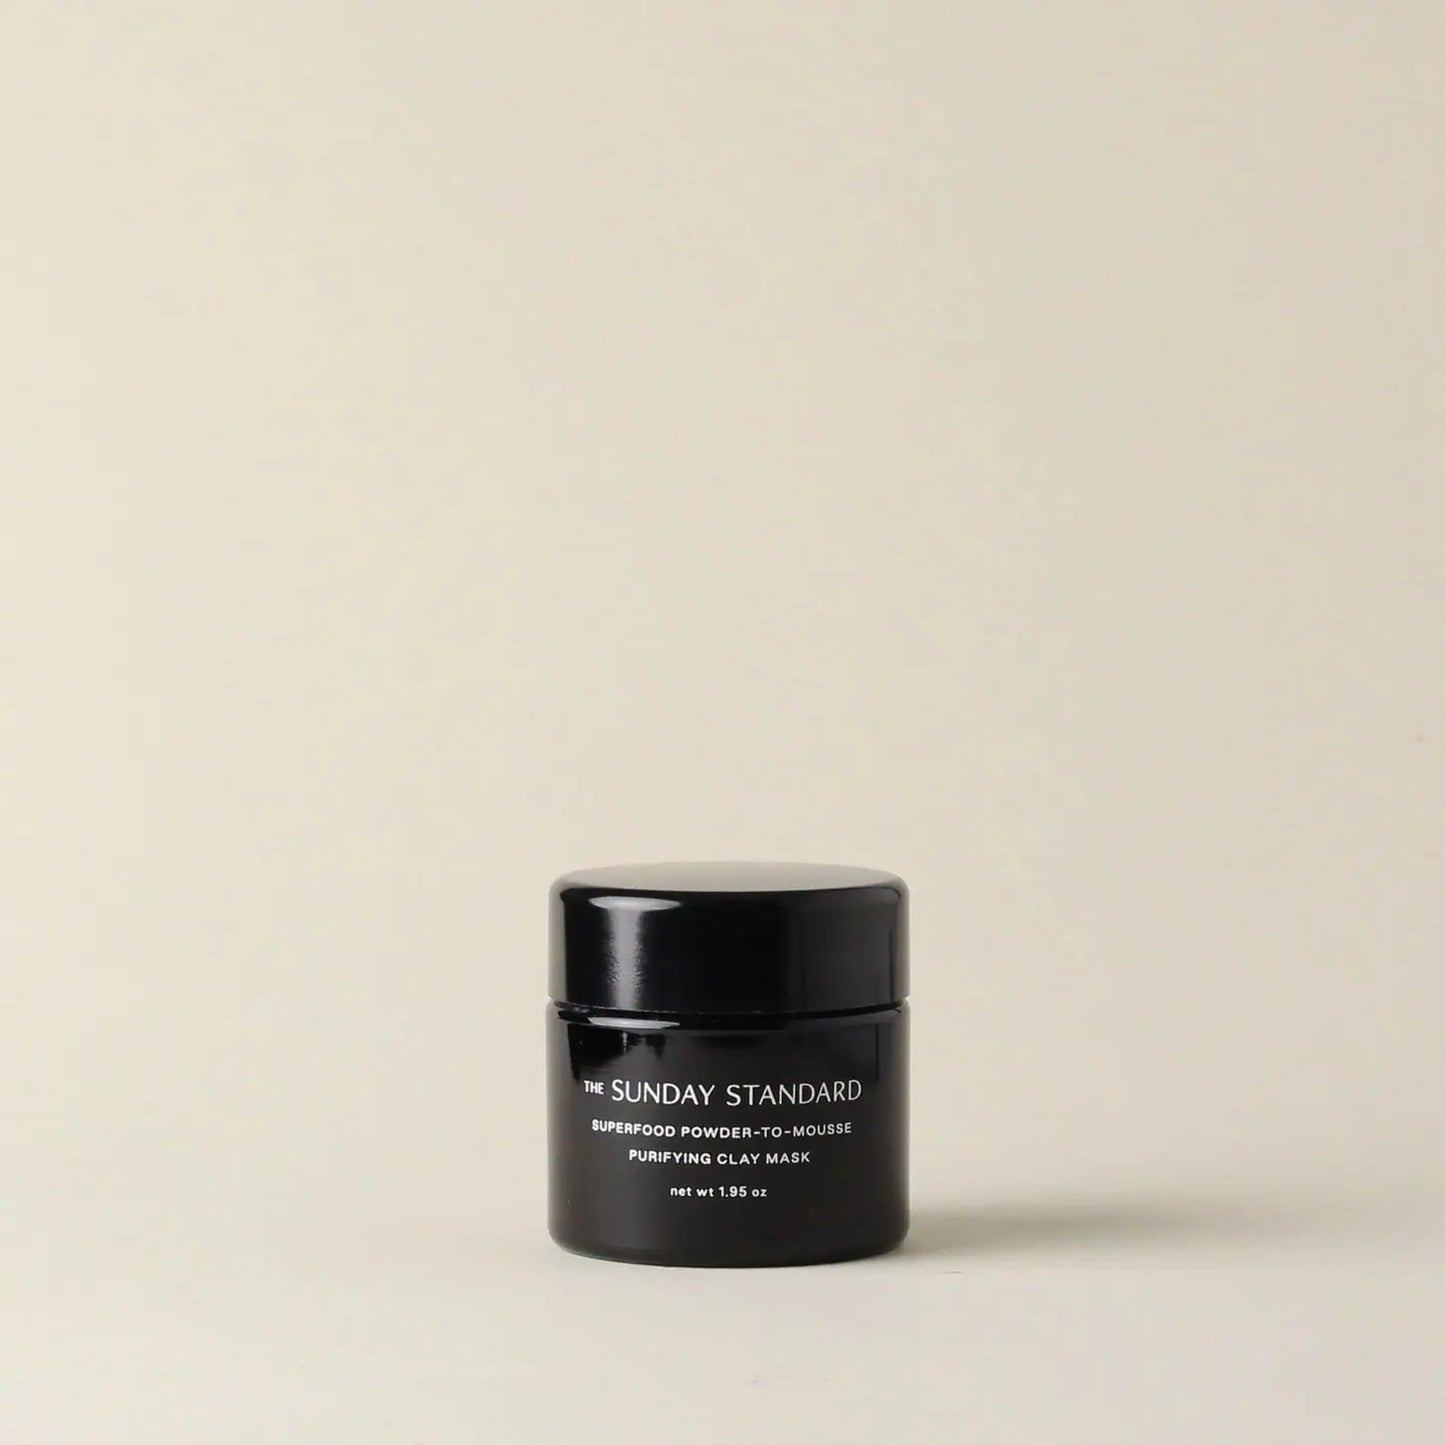 Superfood Powder-To-Mousse Purifying Clay Mask